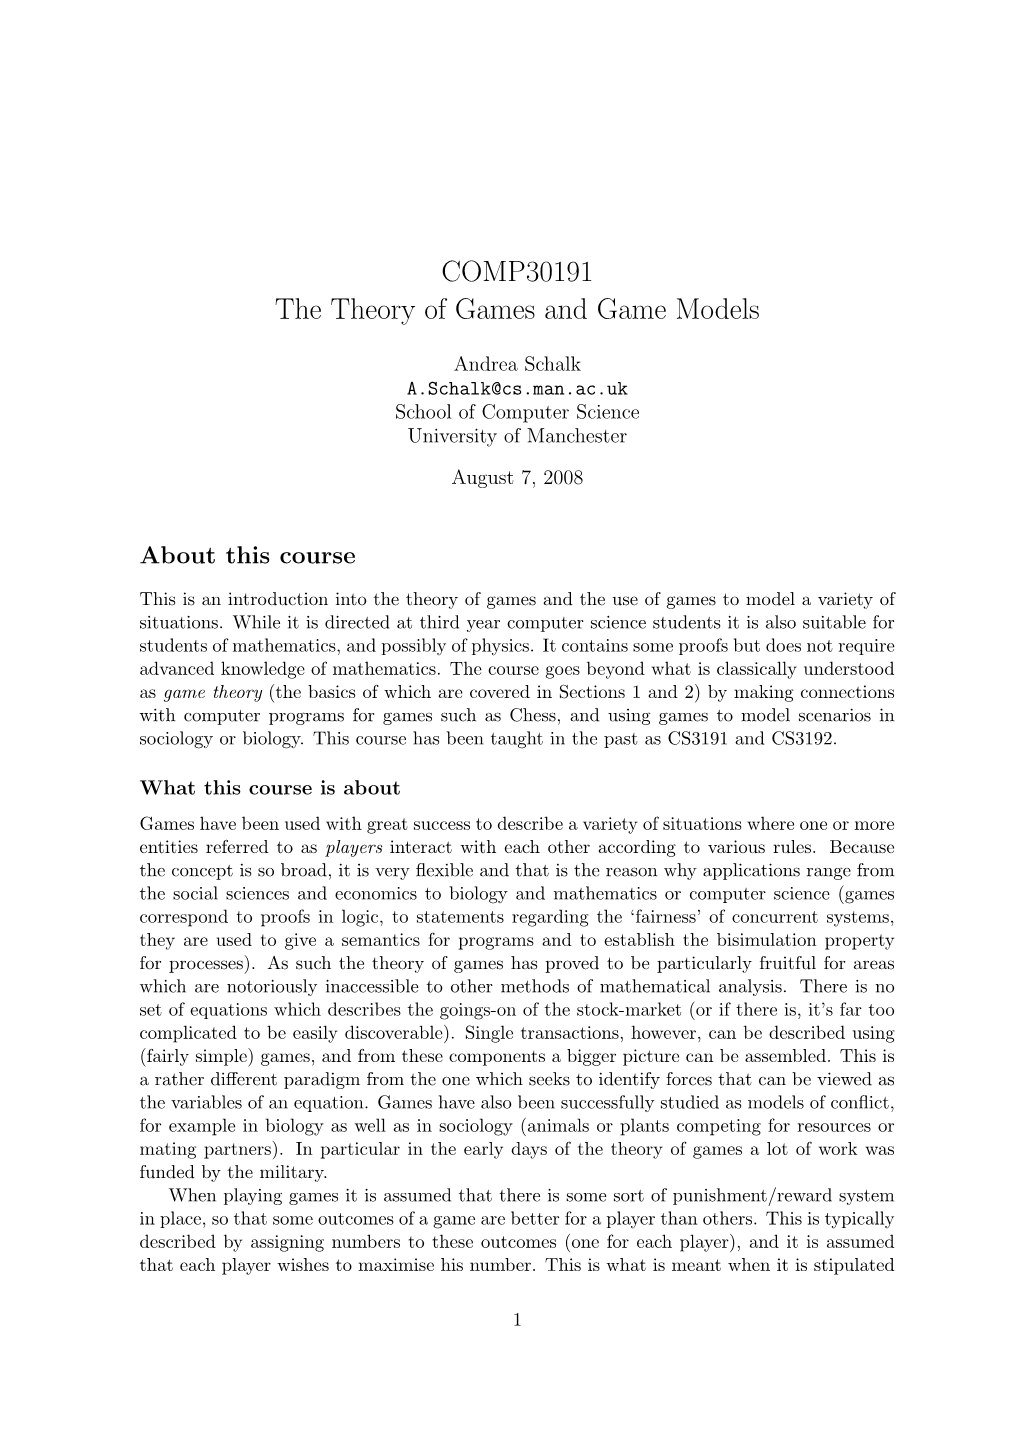 COMP30191 the Theory of Games and Game Models